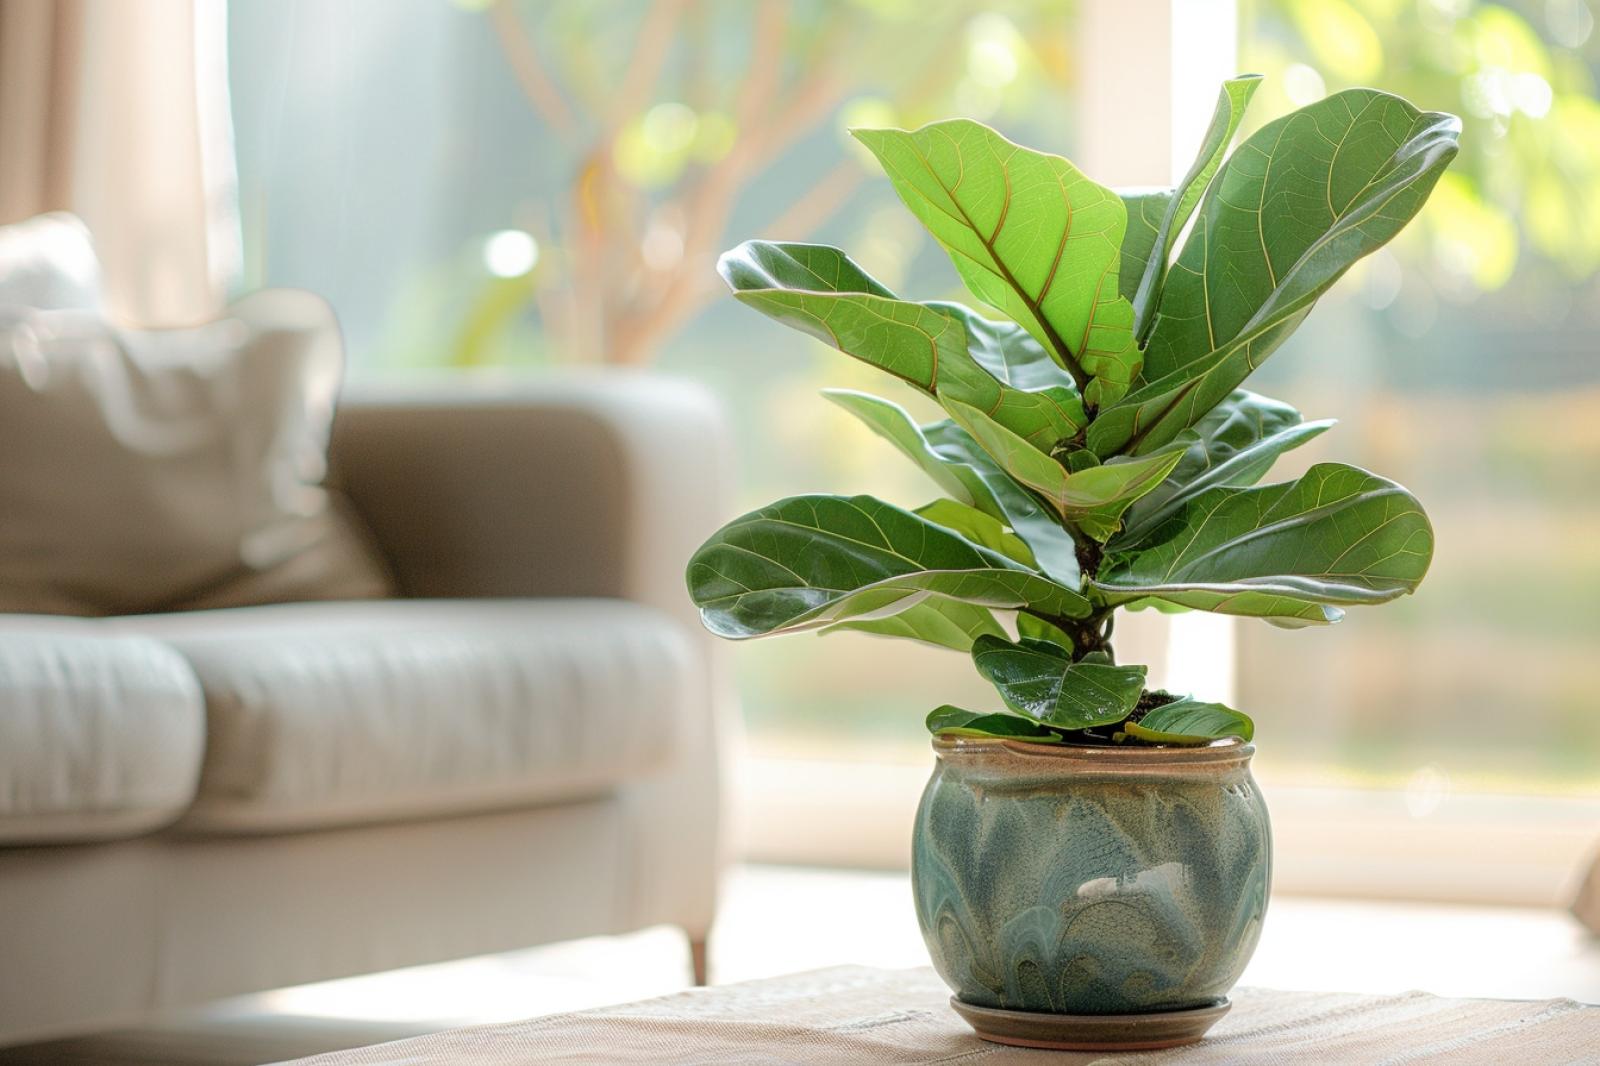 https://thehealthyhouseplant.com/what-soil-is-best-for-fiddle-leaf-figs-store-bought-options-vs-homemade/